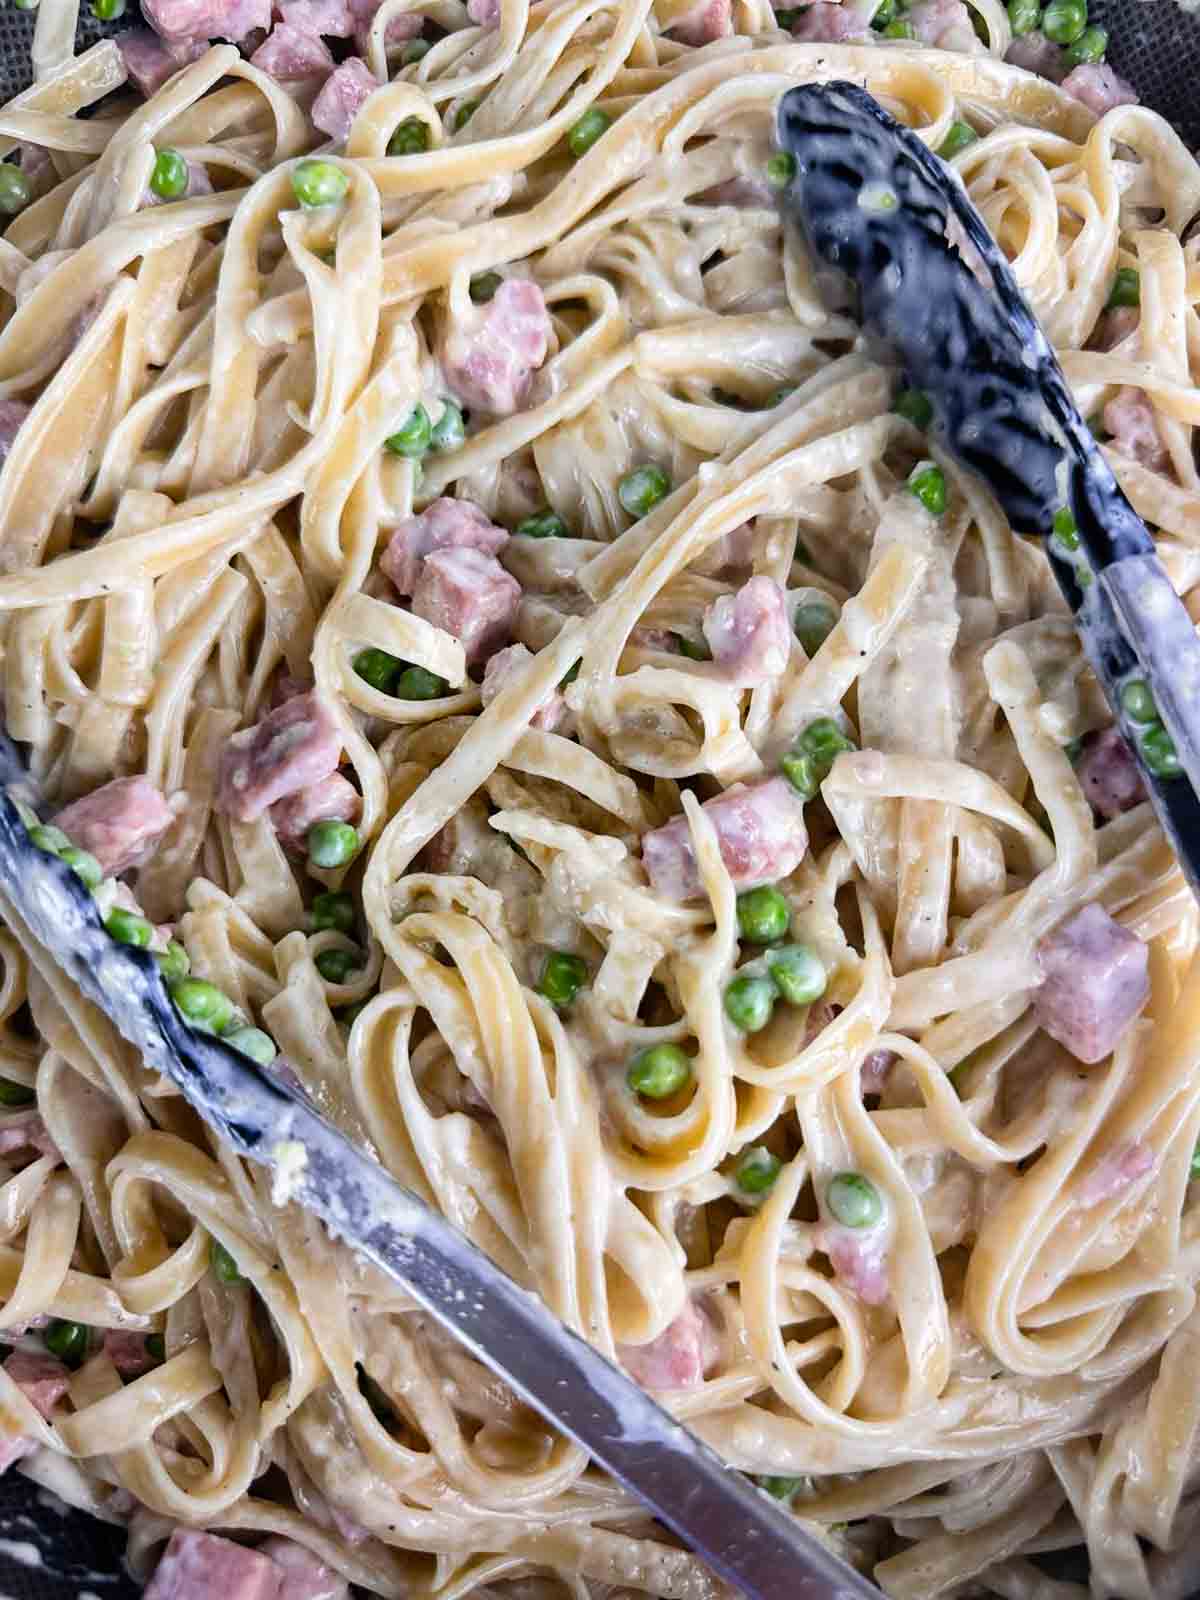 Add the heavy cream and Parmesan cheese to the pasta with ham and peas and toss it until the noodles are coated.